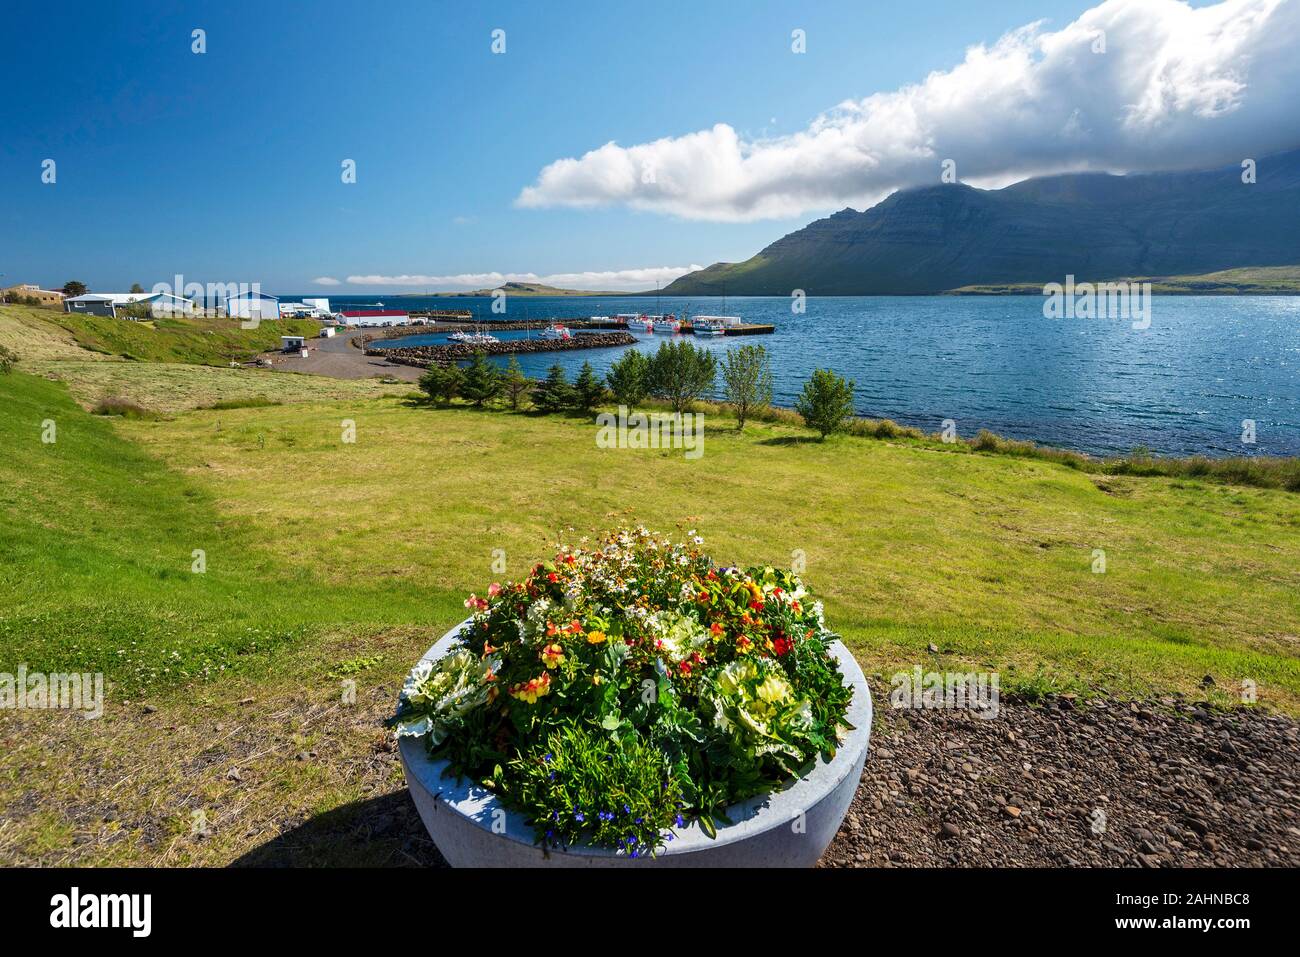 Stodvarfjordur village and Stodvar Fjord view in Eastern Iceland. Flowers planted in the concrete bowl are at foreground. Stock Photo